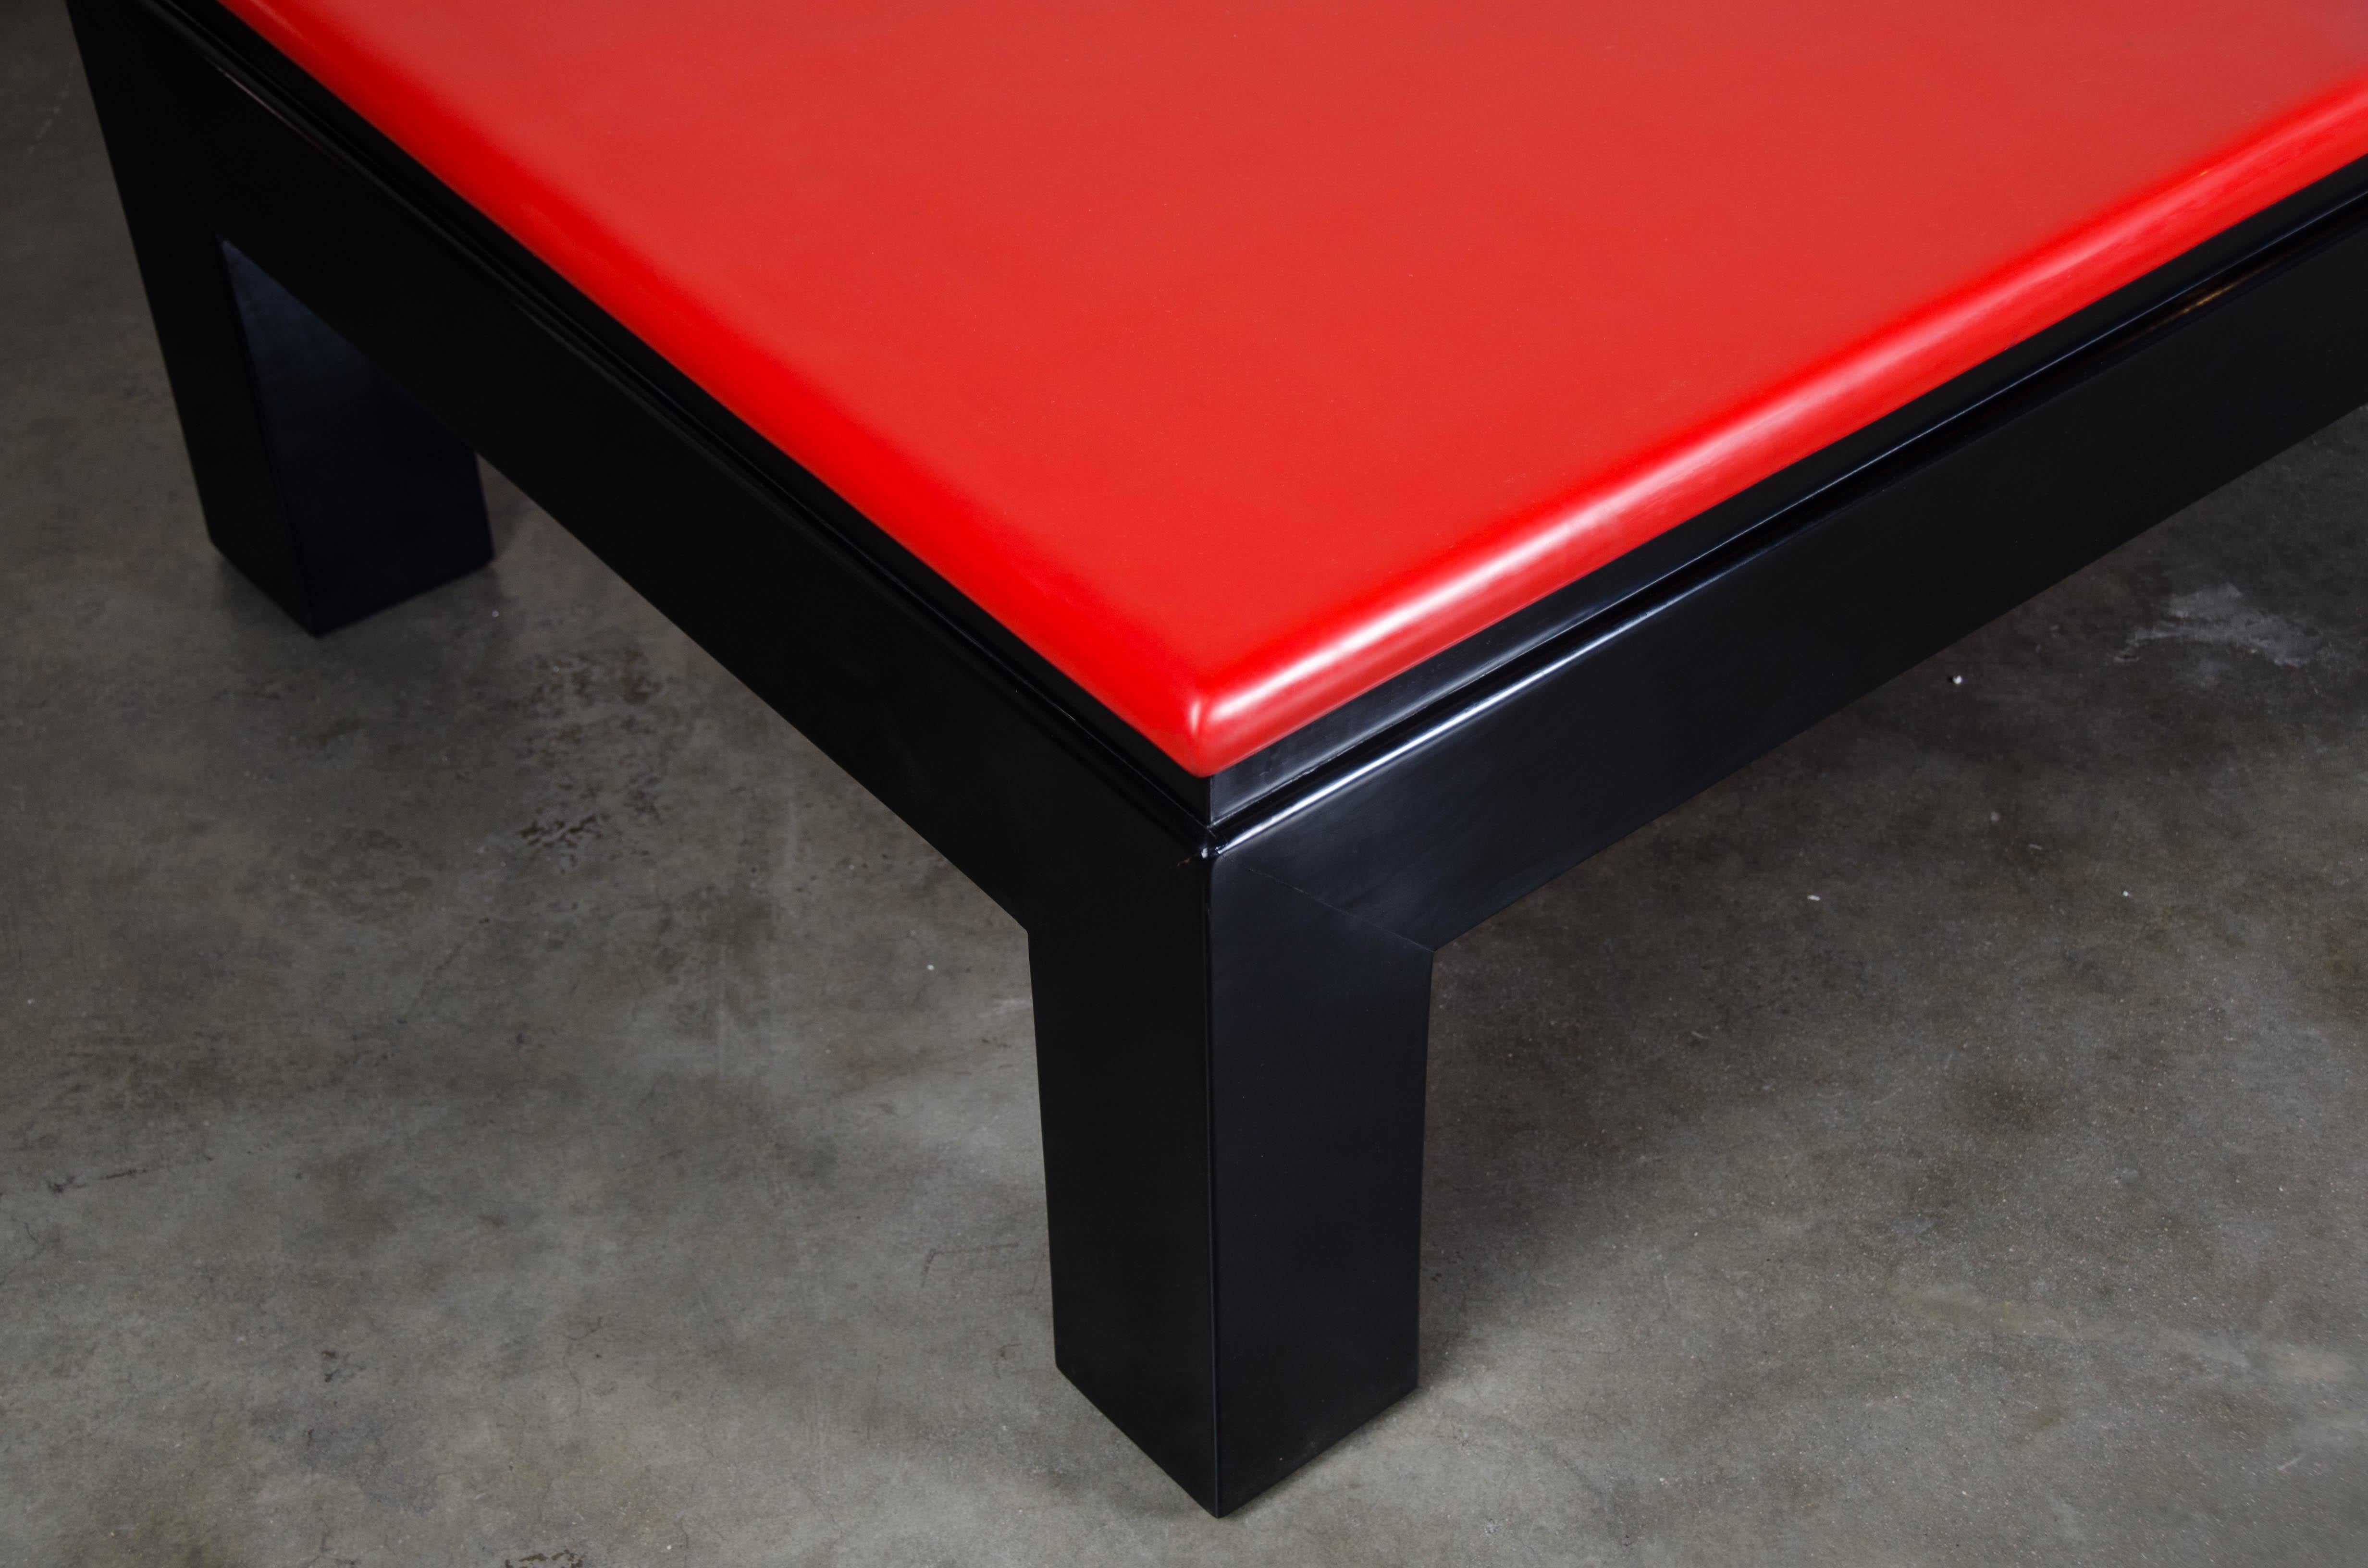 Contemporary Ming Coffee Table, Red Lacquer by Robert Kuo, Handmade, Limited Edition For Sale